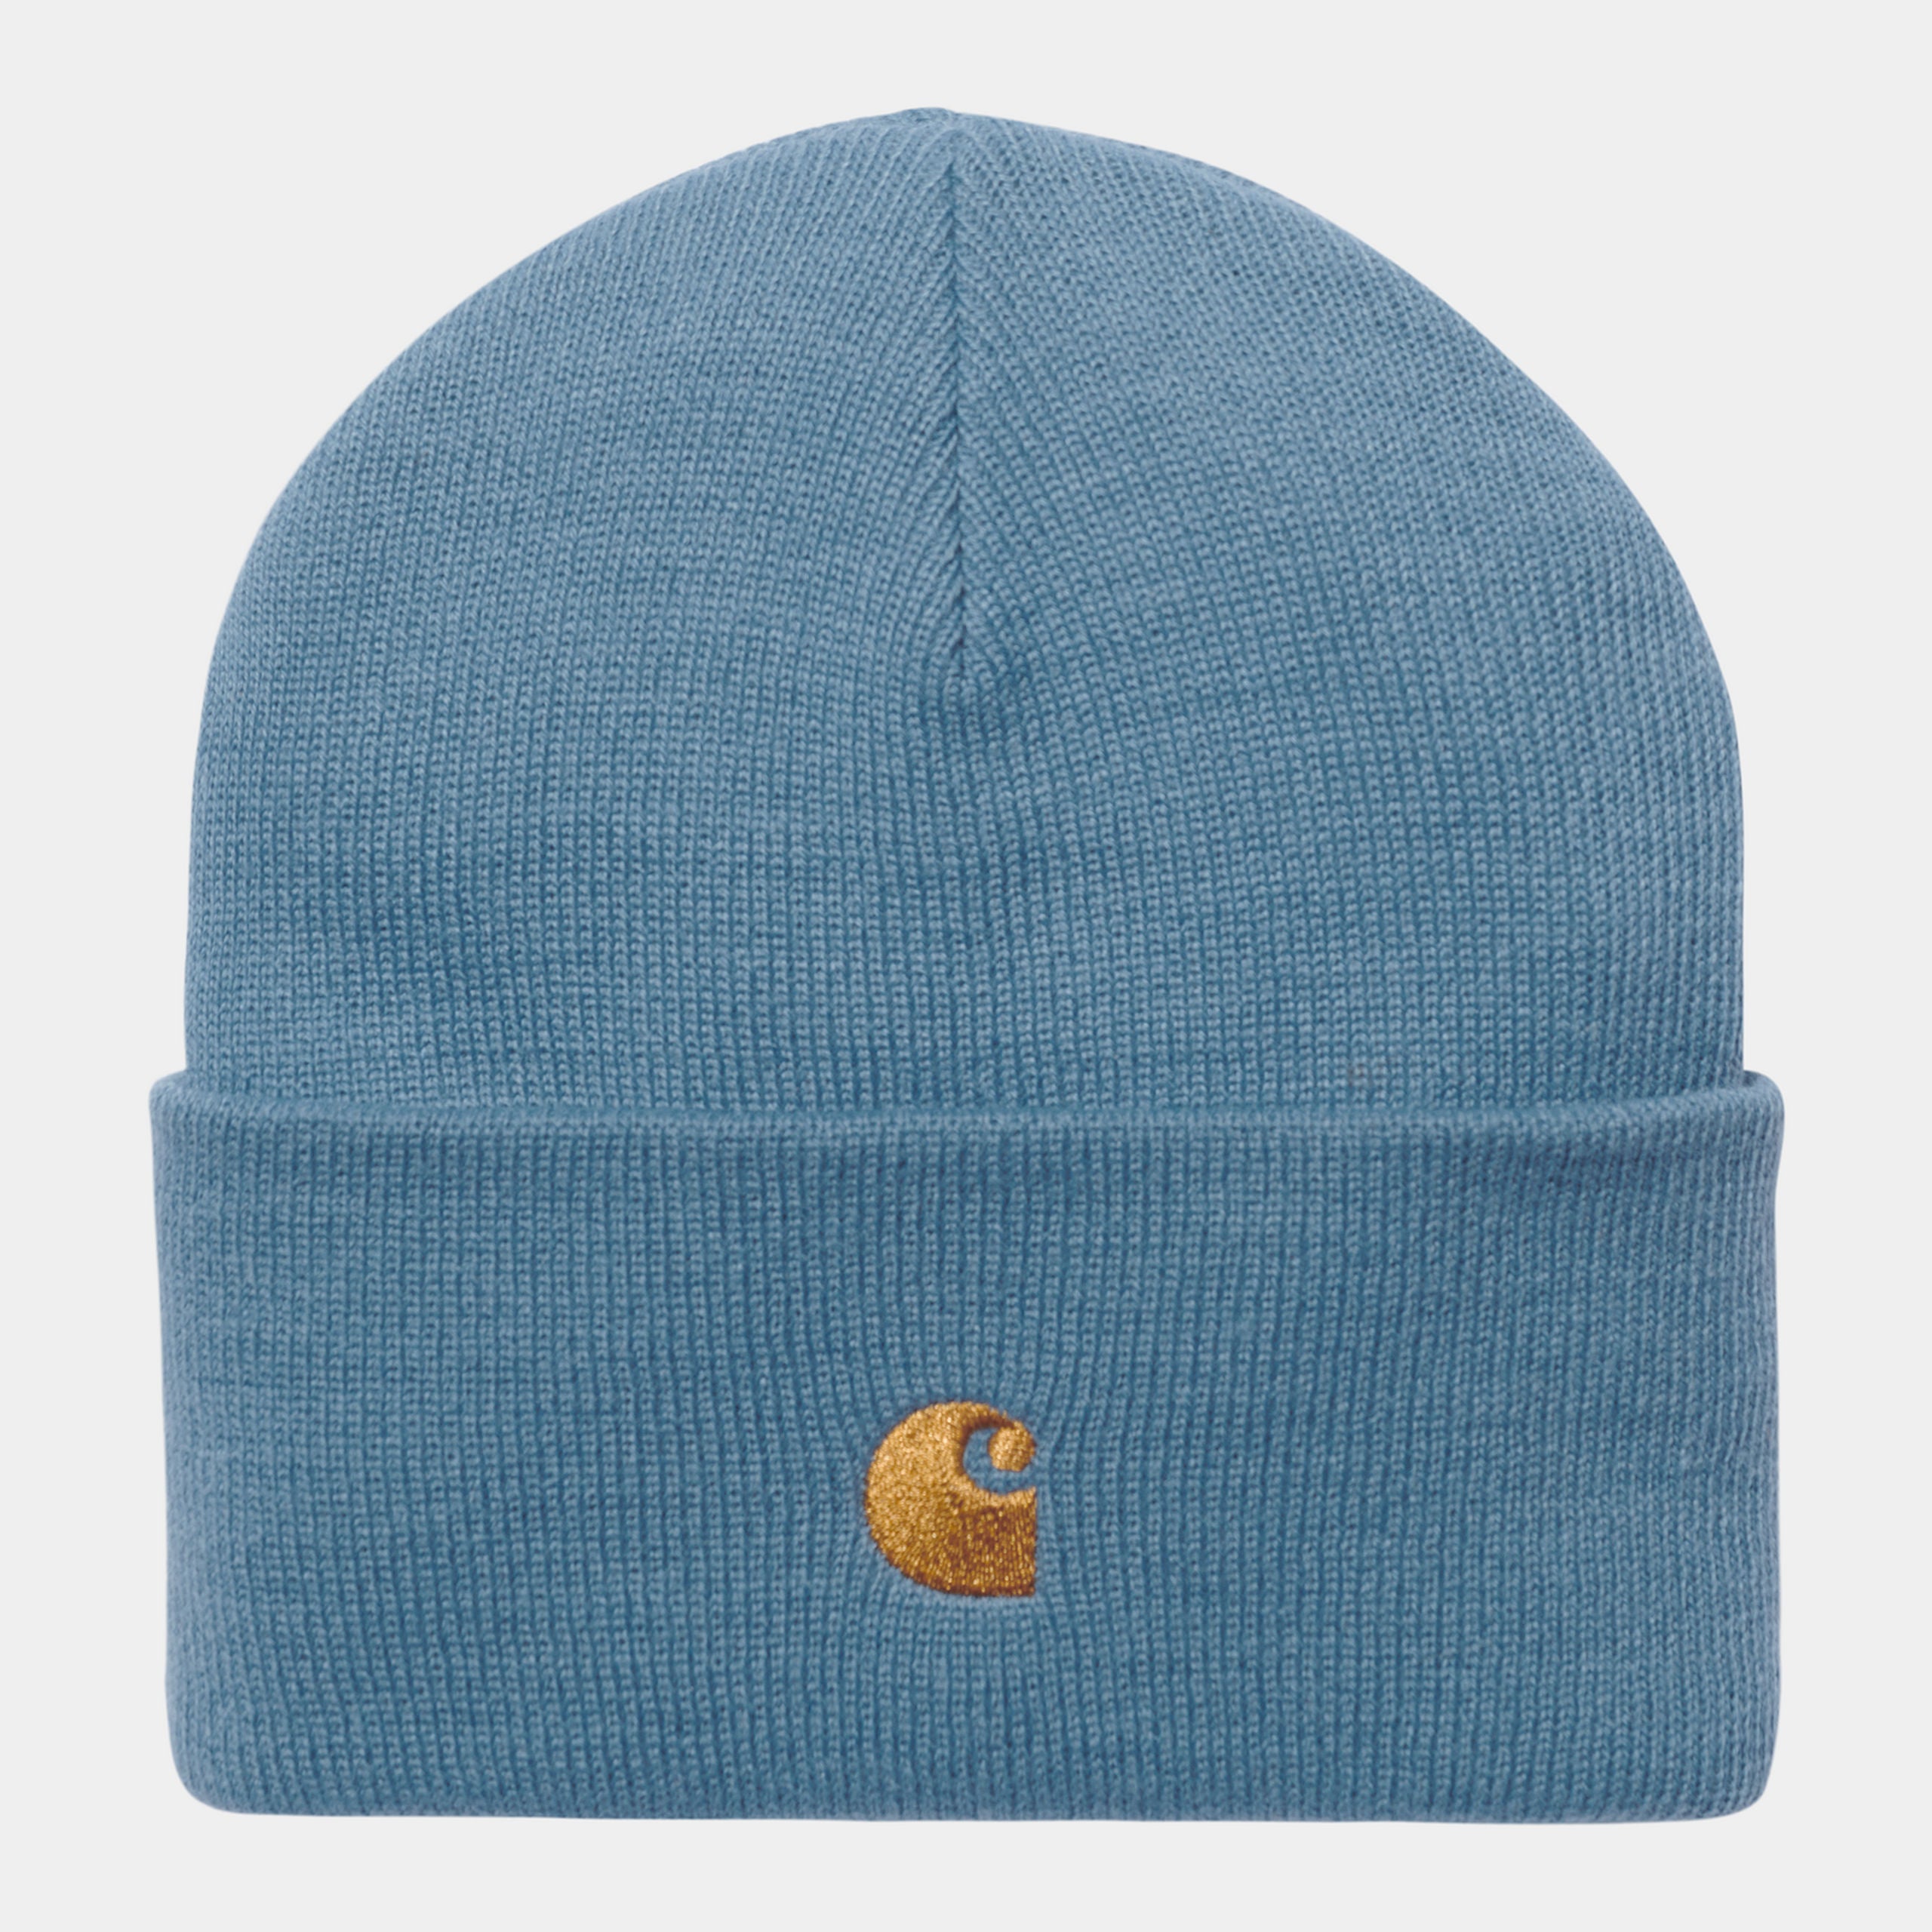 Carhartt Unisex Chase Beanie - Icy Water / Gold